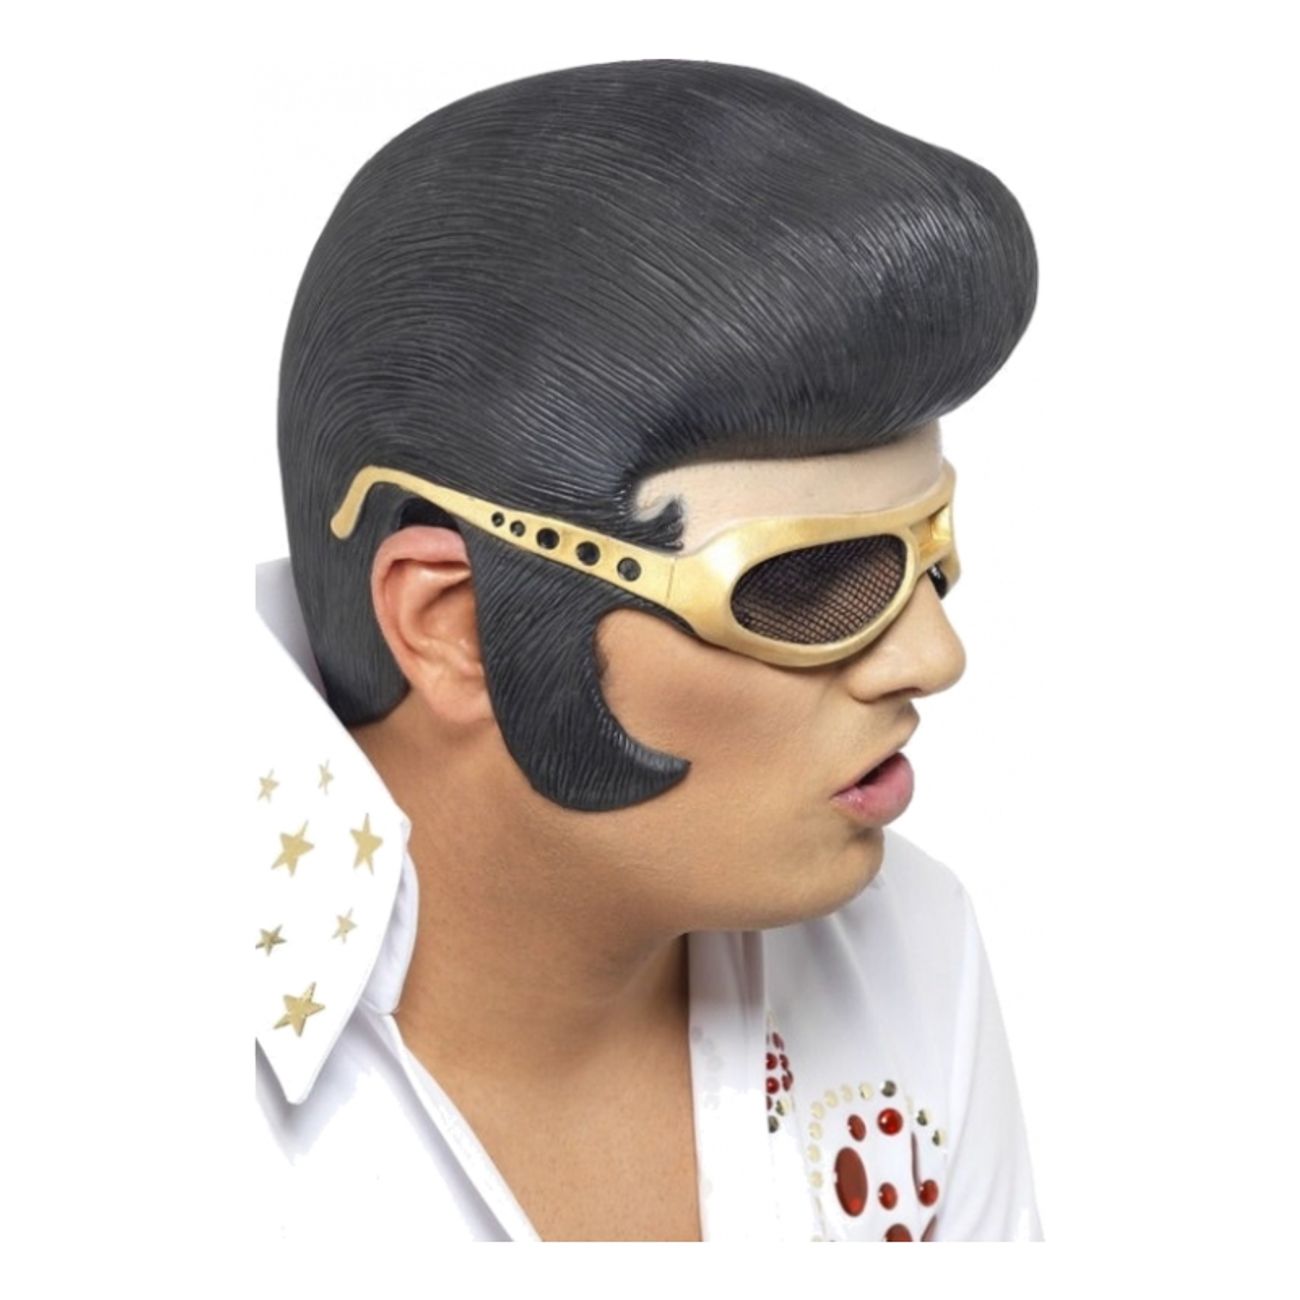 official-elvis-headpiece-with-rubber-shades-1